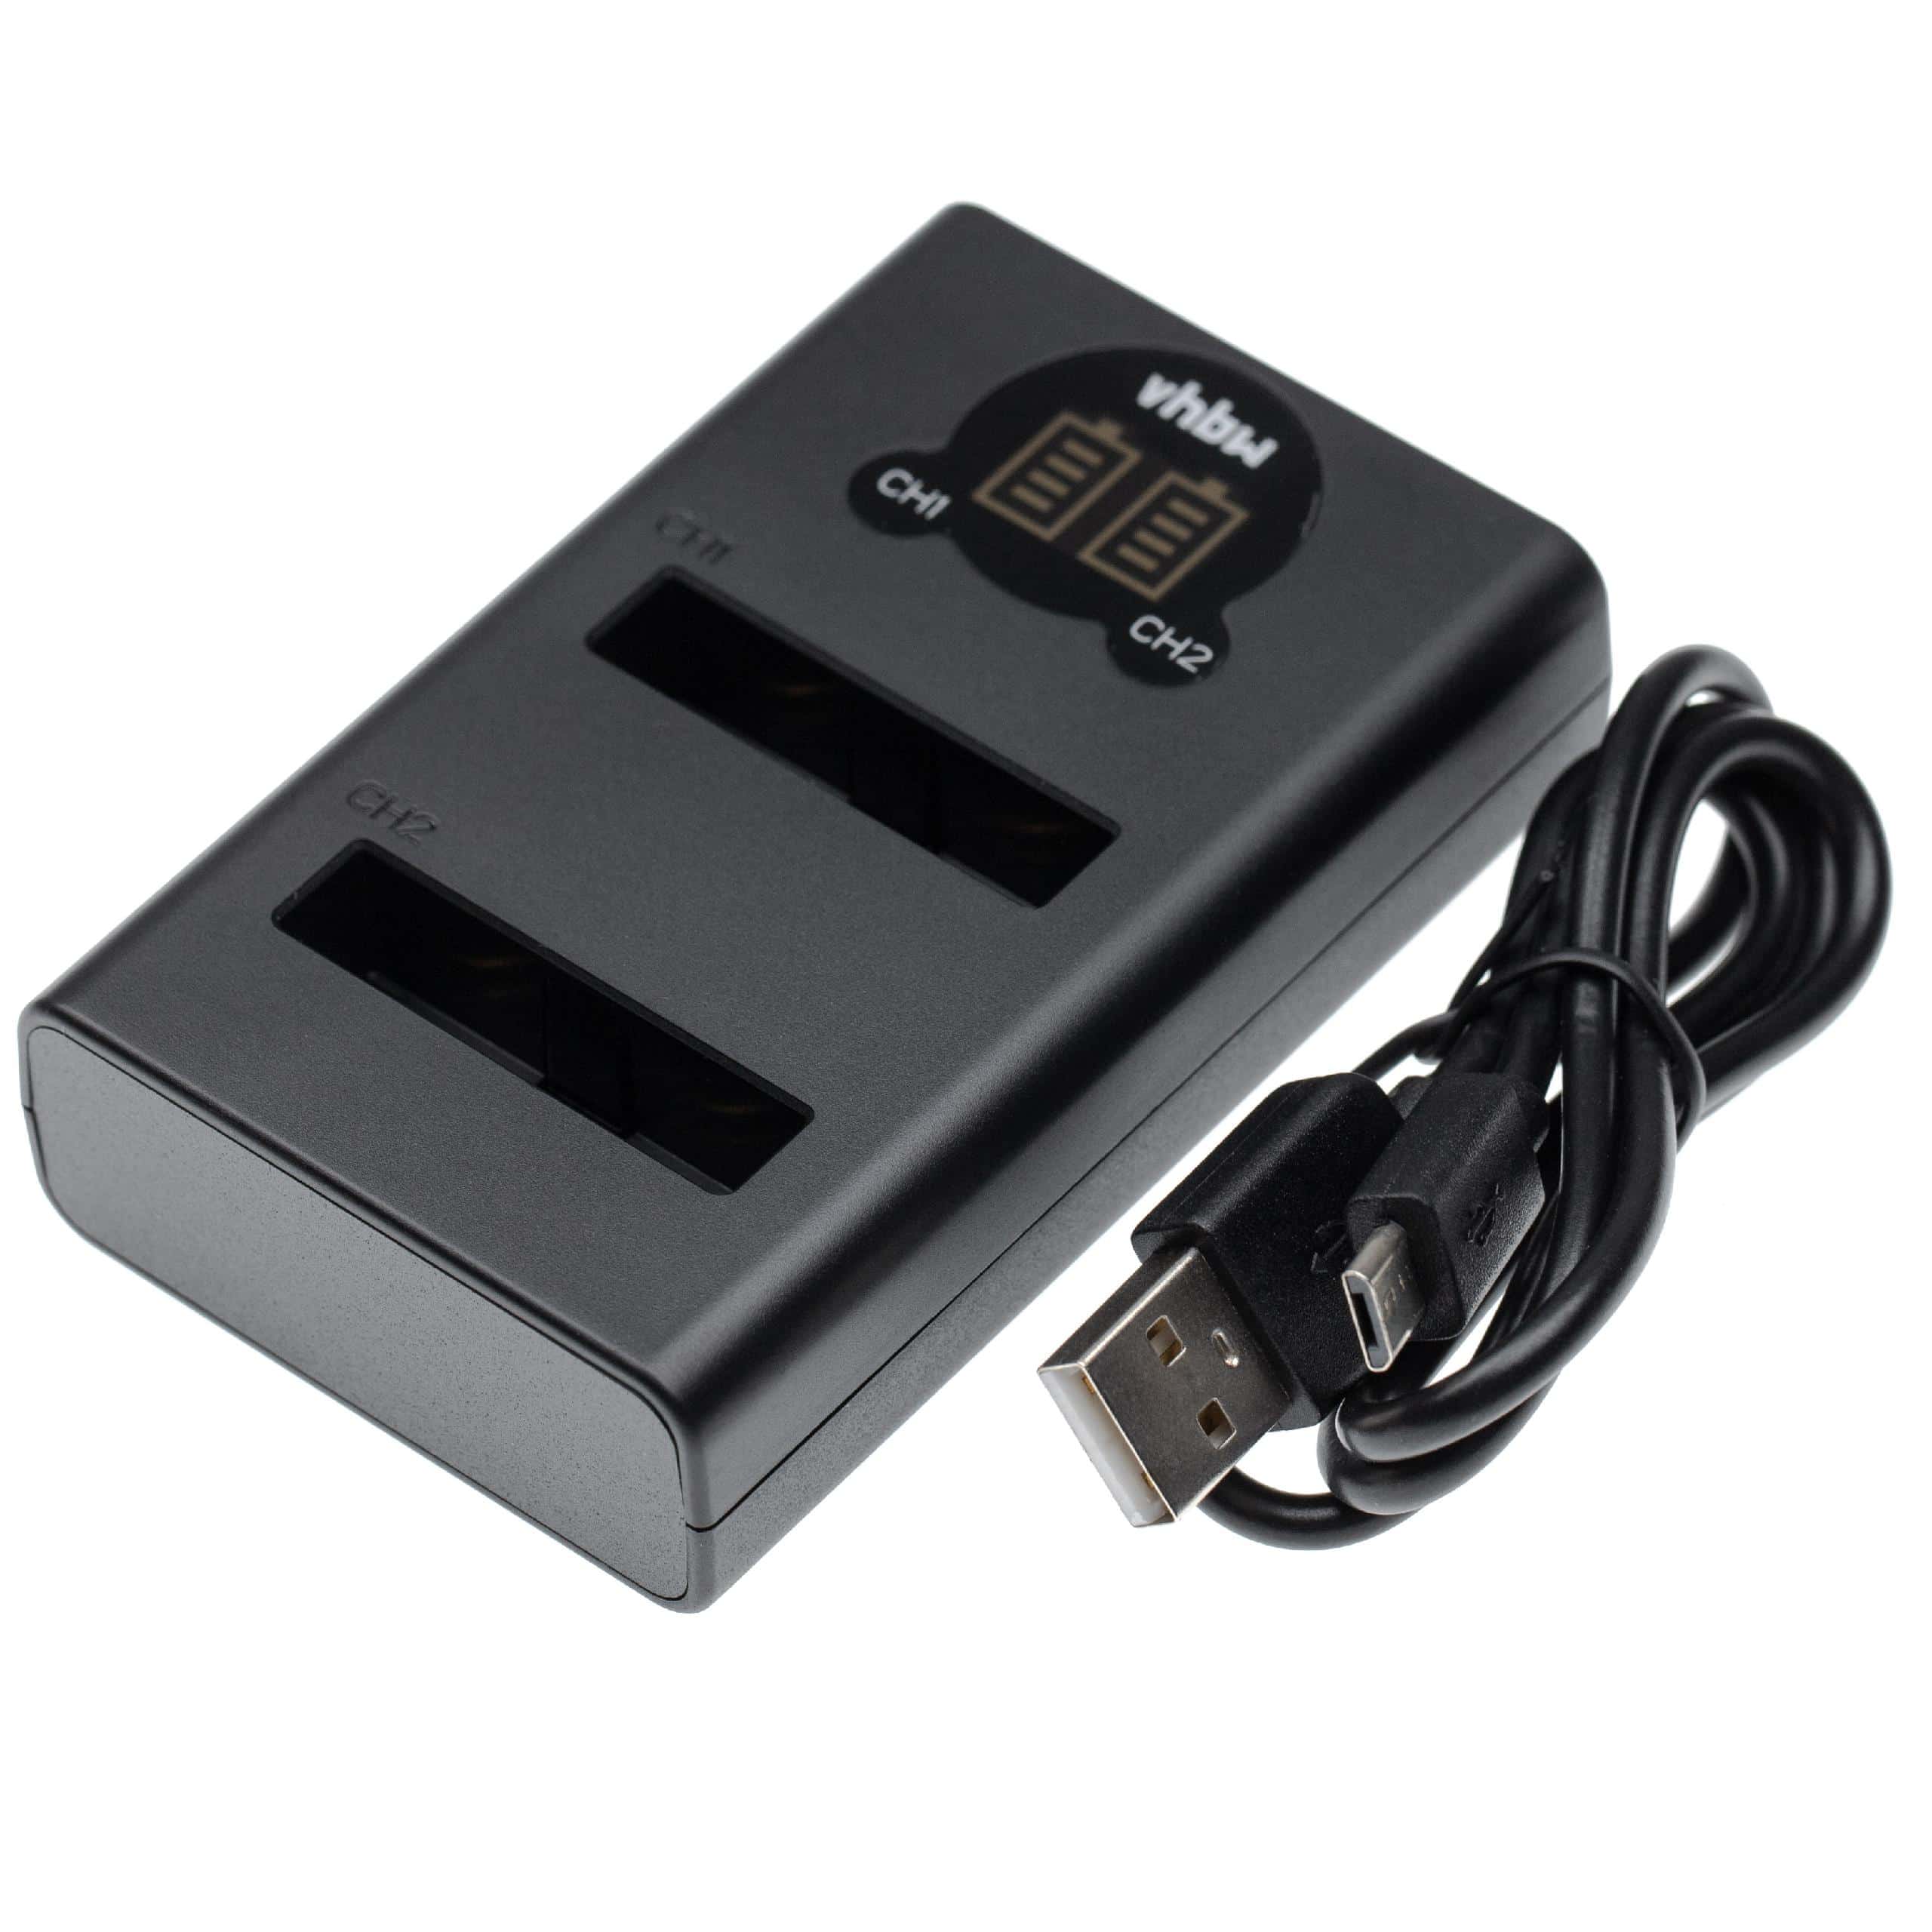 Battery Charger suitable for Coolpix 3700 Camera etc. - 0.7 A, 4.2 V